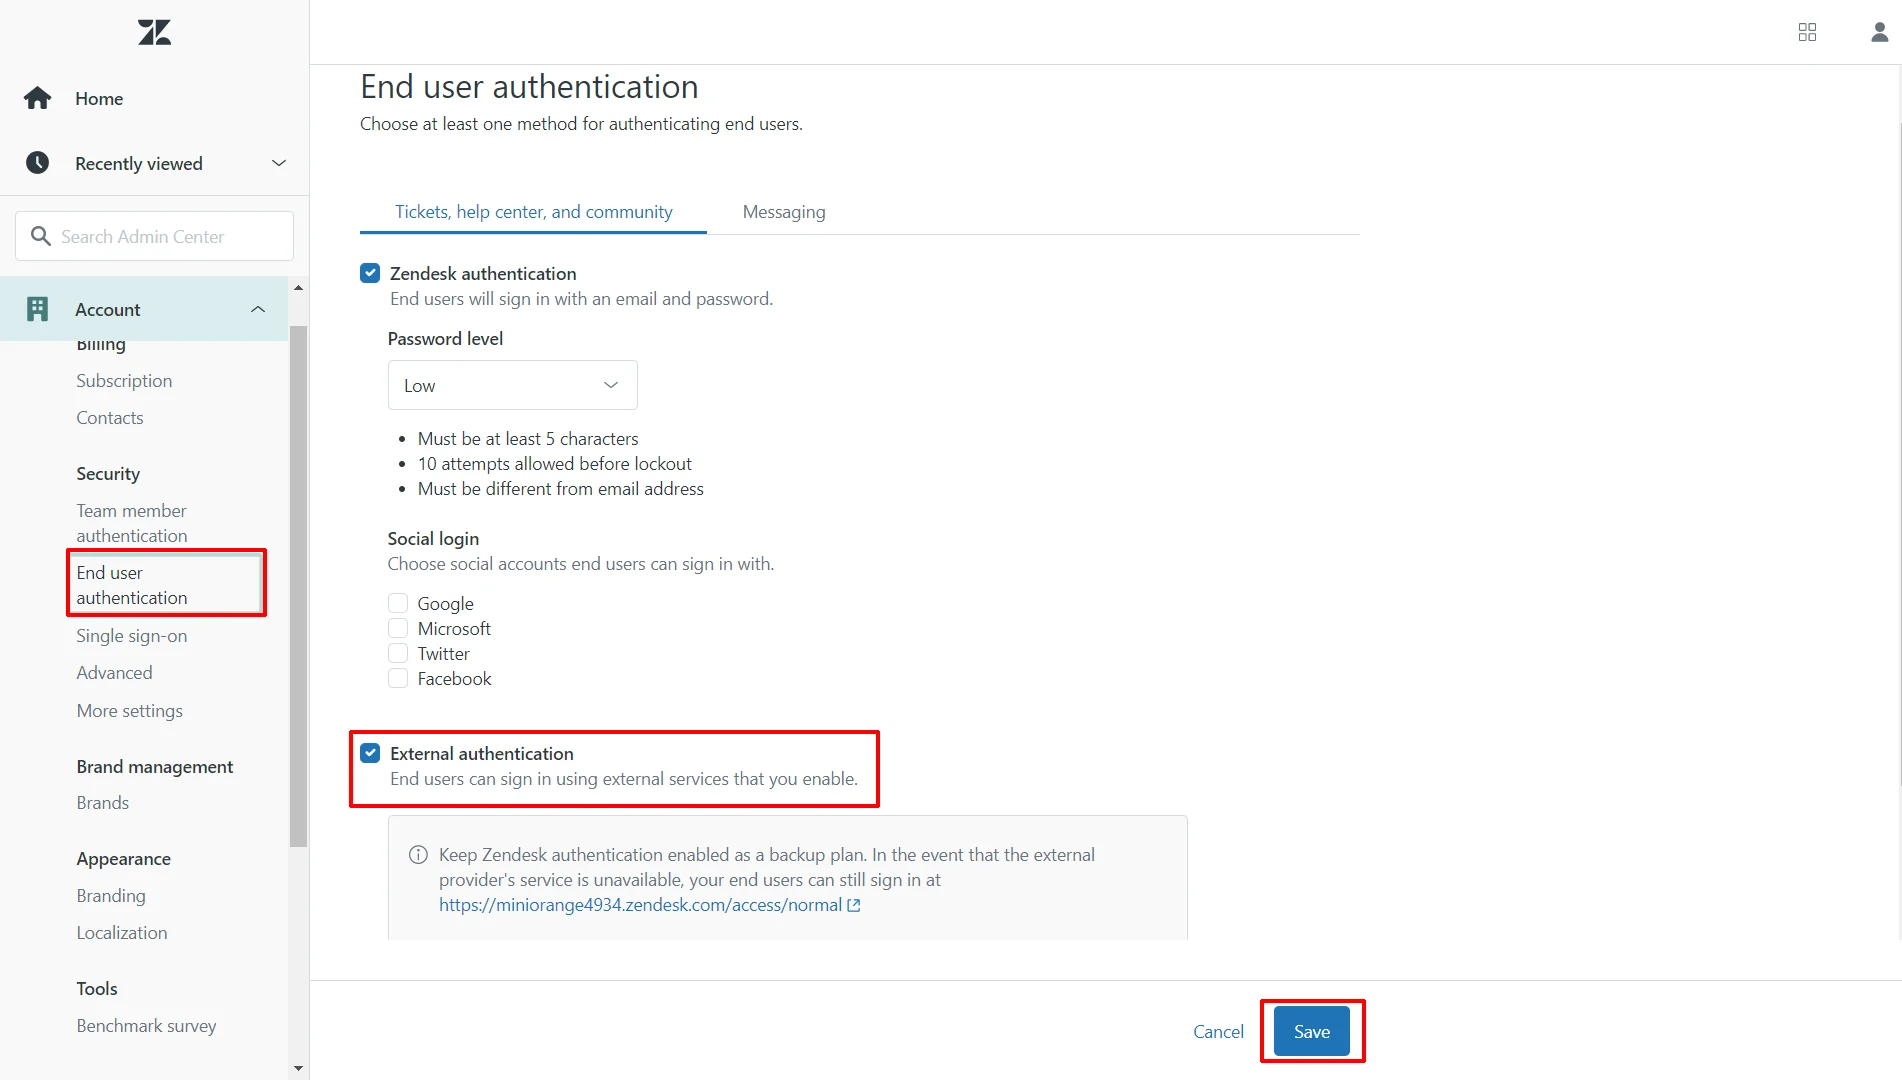 Zendesk sso shopify as idp -  end user authentication